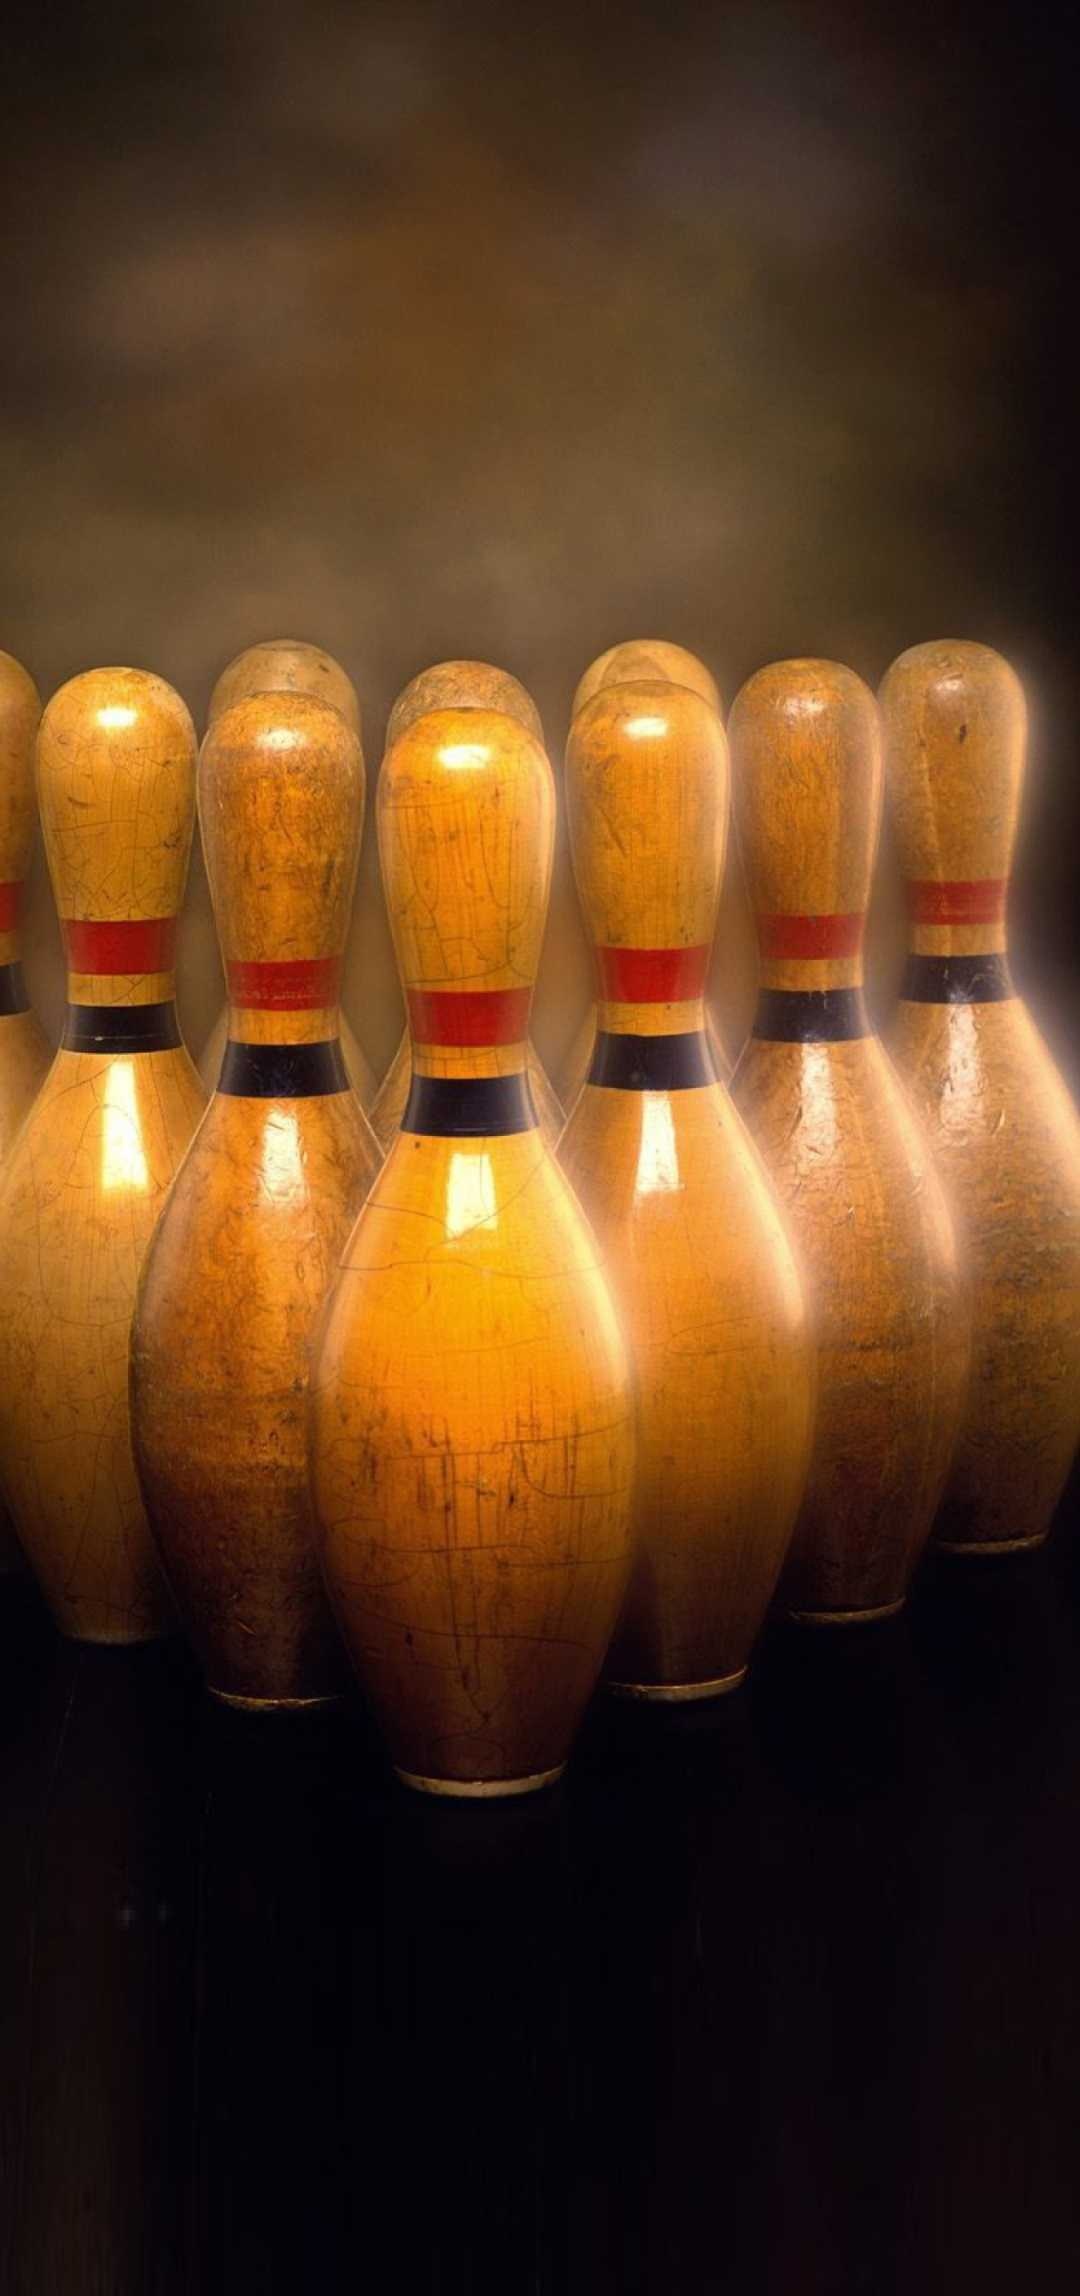 Bowling: An activity which goal is to knock down the pins set at the end of the board-less track. 1080x2300 HD Background.